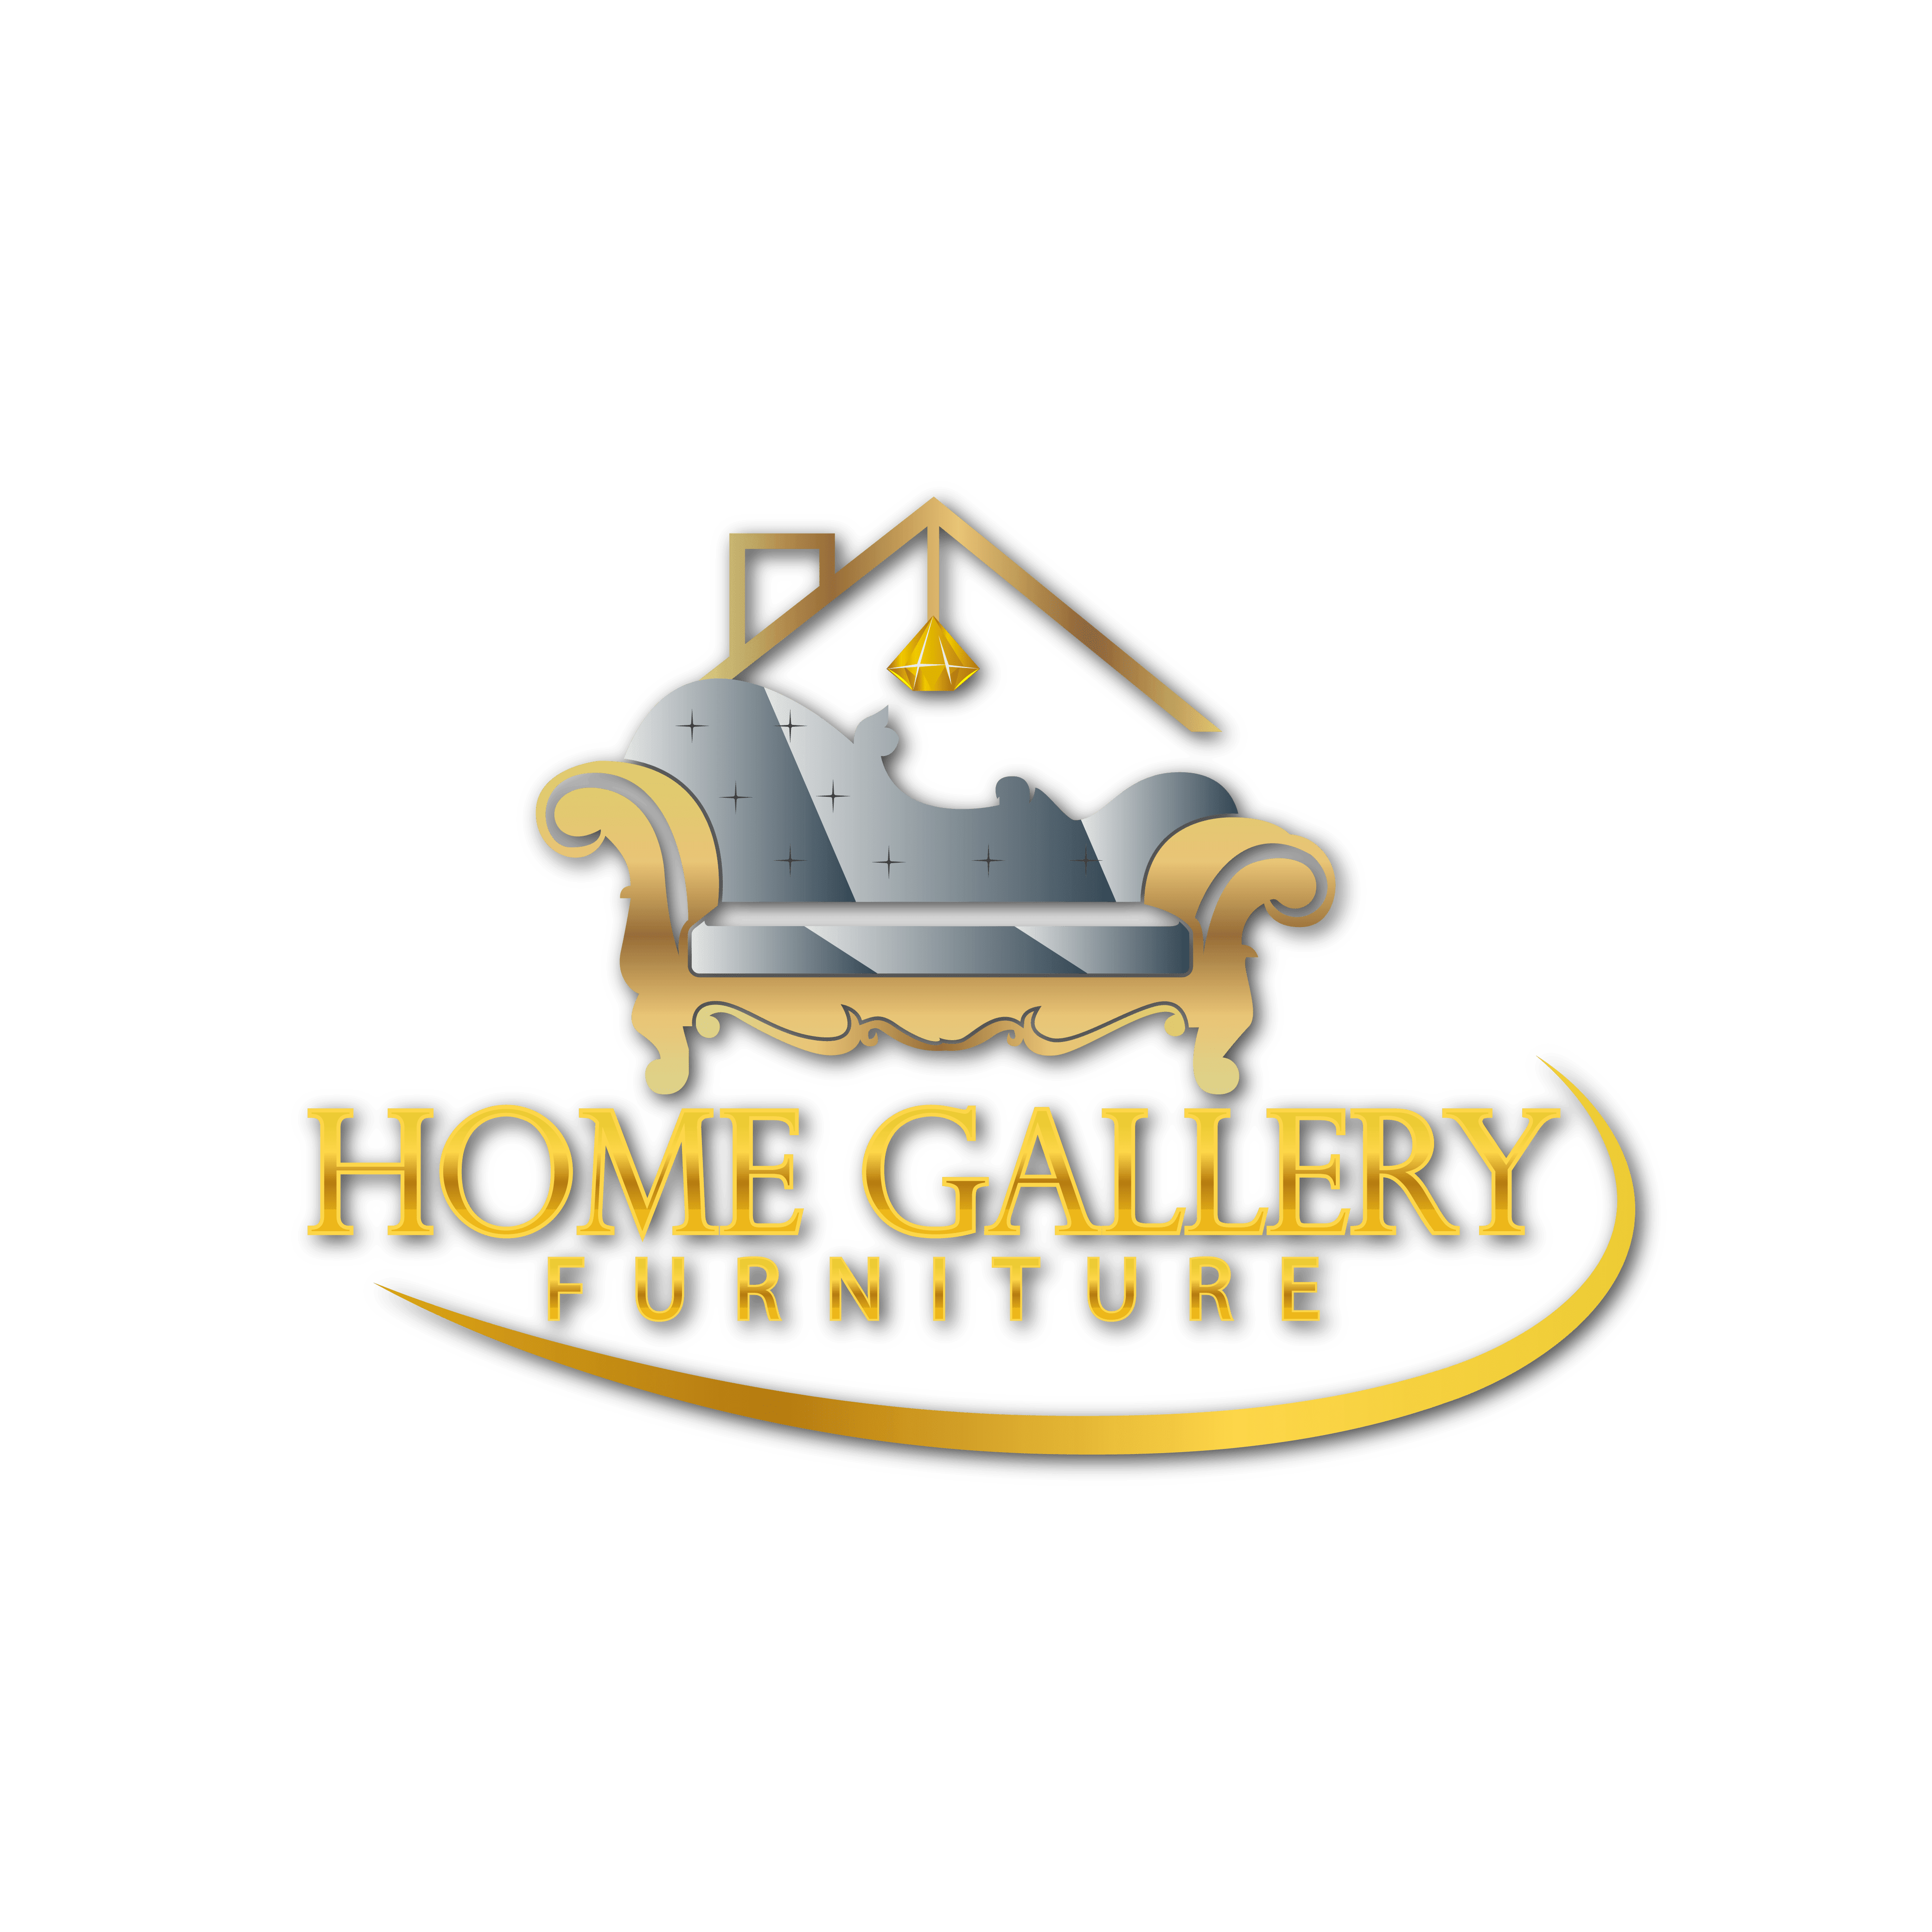 Home Gallery Furniture